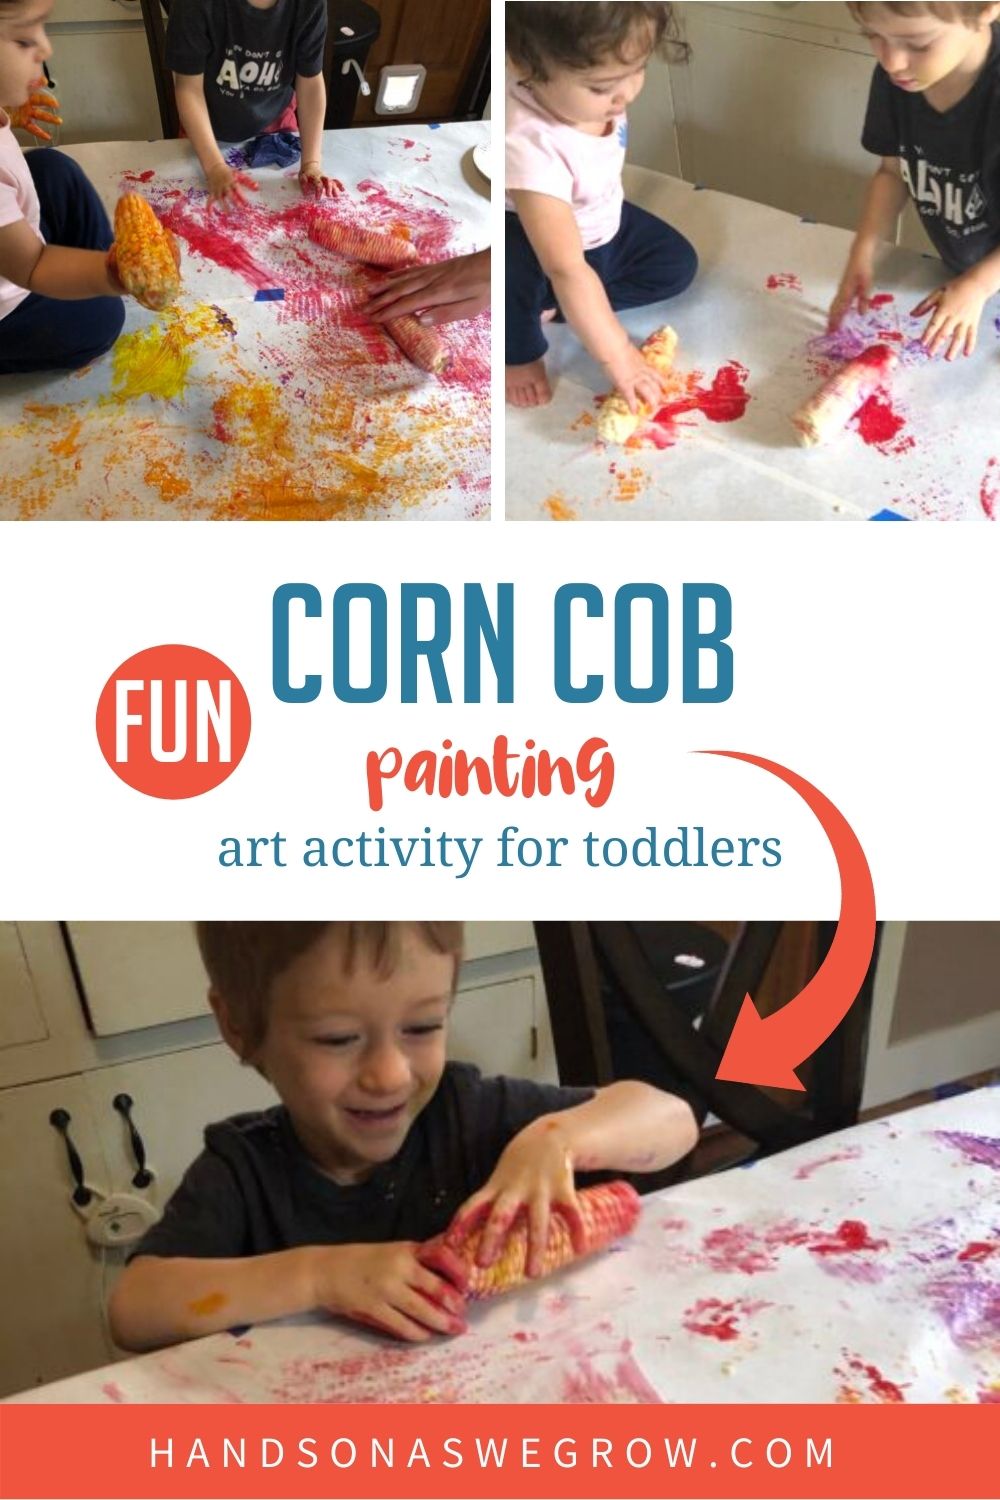 Corn Cob Painting is a Simple Fun Art Activity for Toddlers